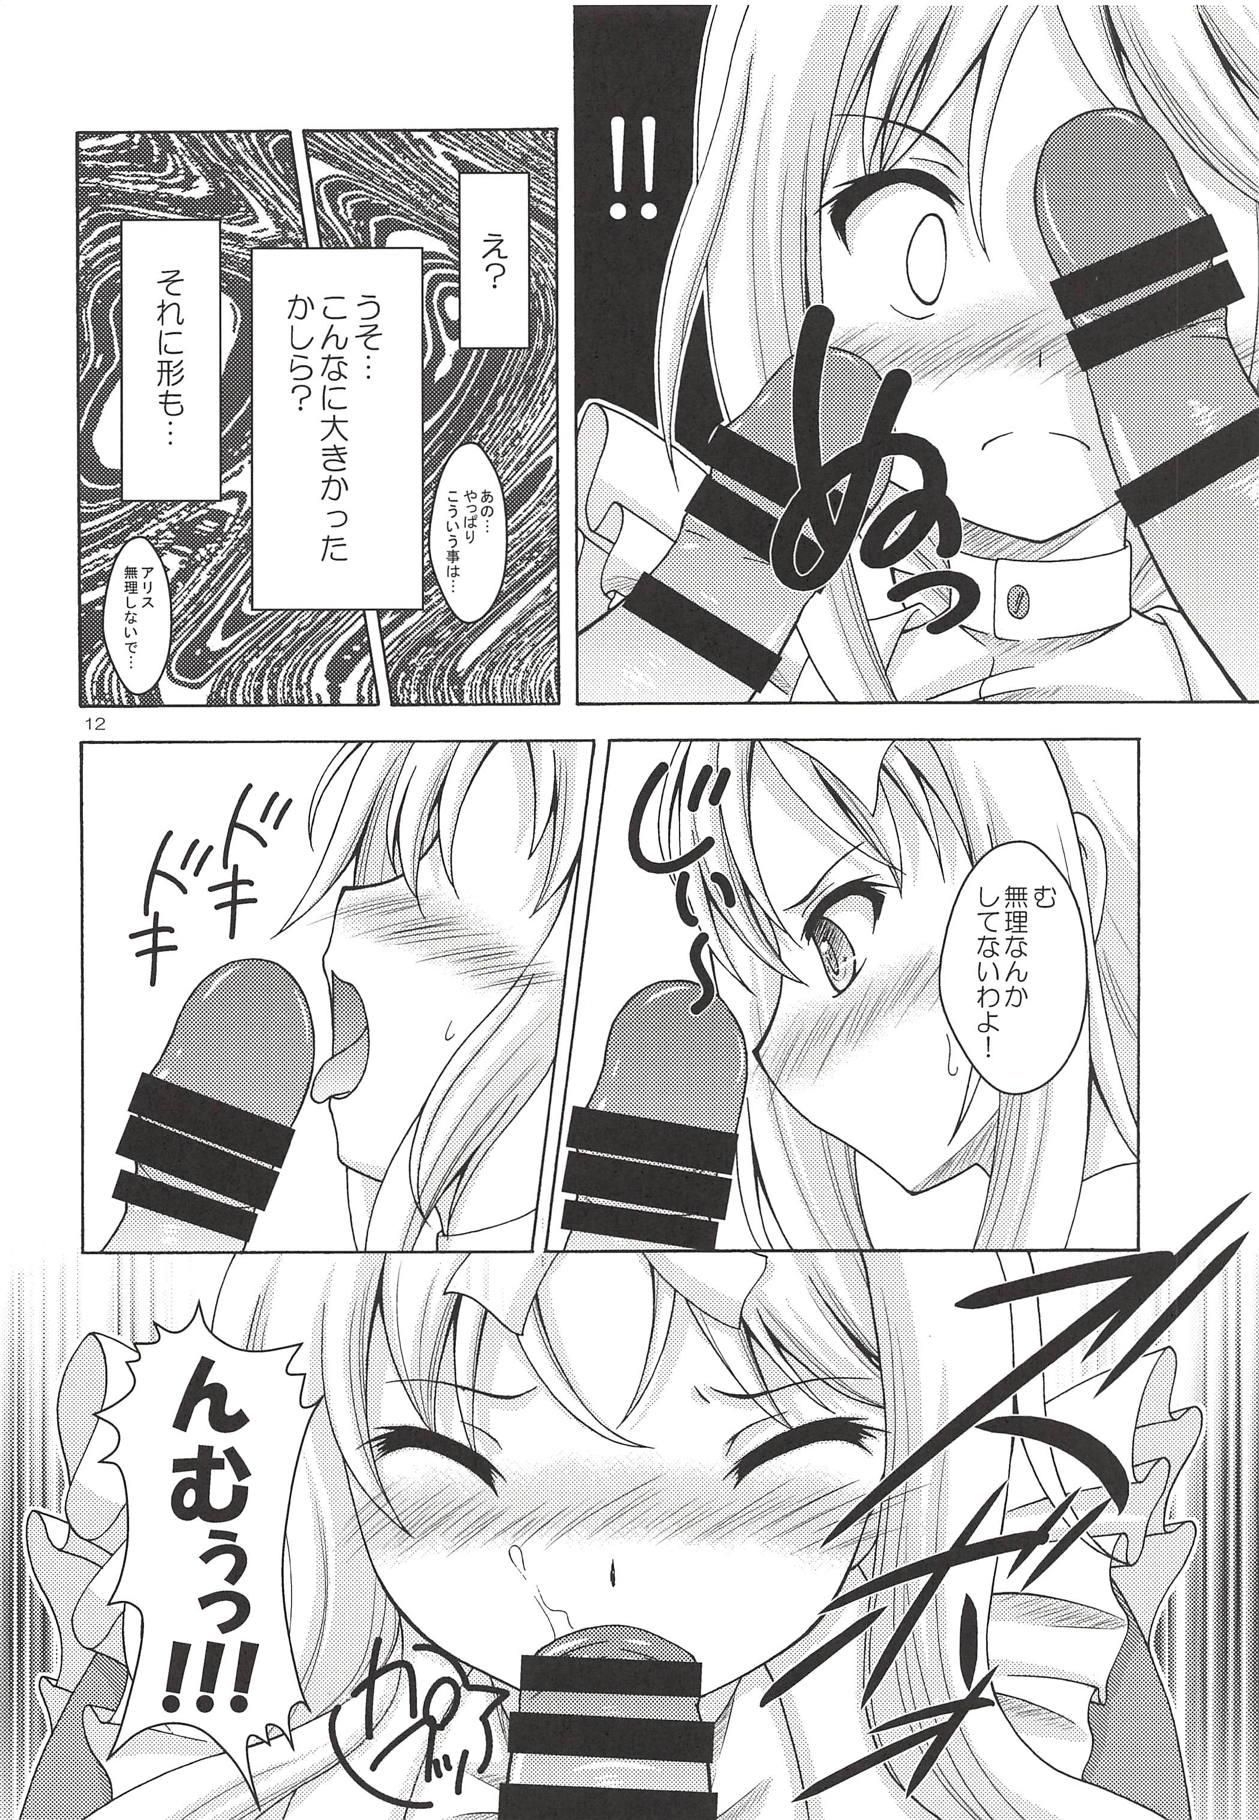 Cowgirl Alice no Yume - Sword art online Blowjob Porn - Page 11